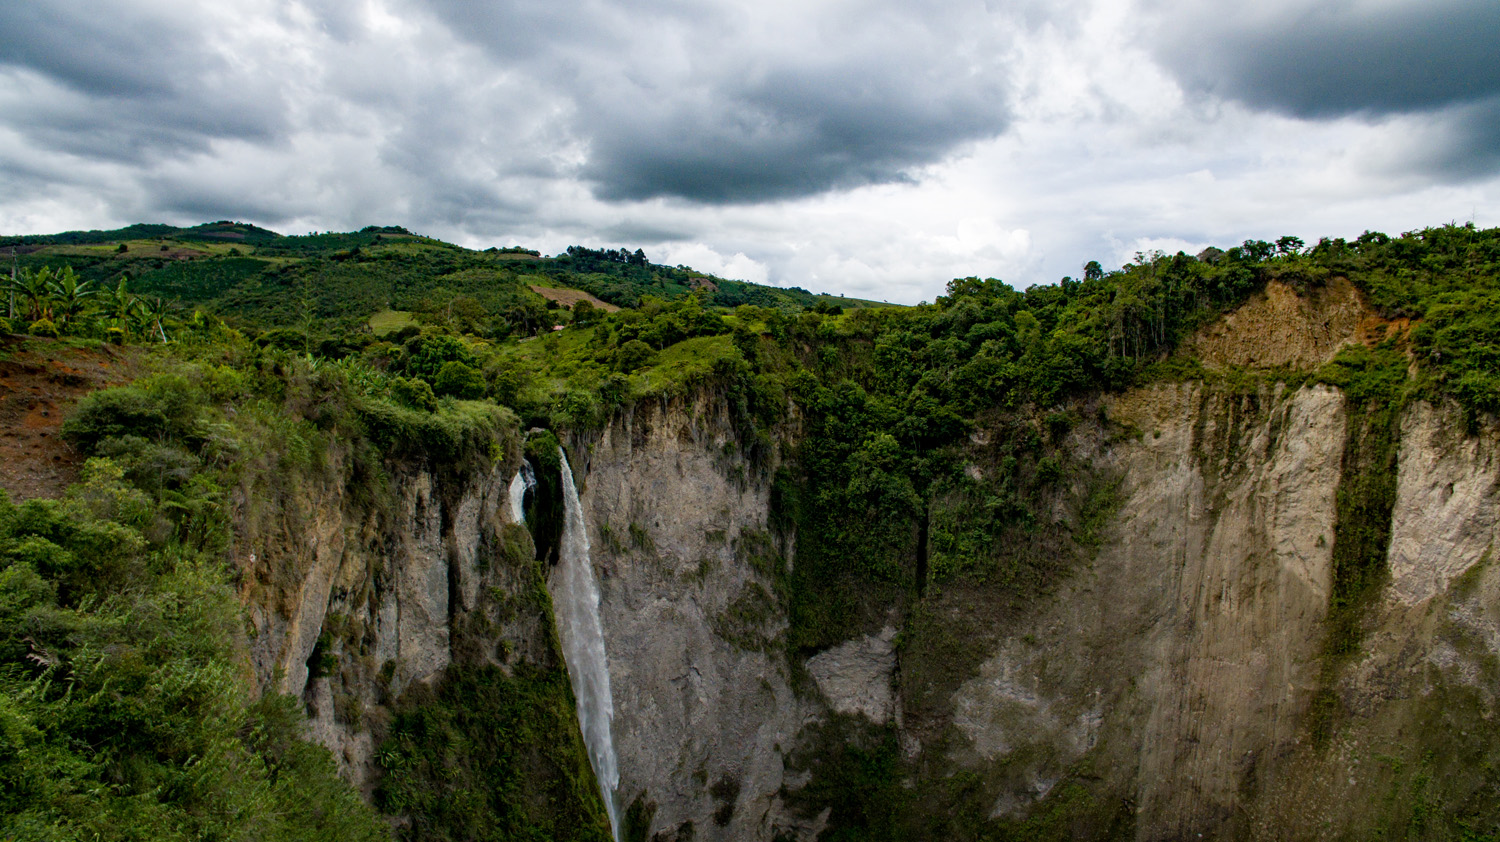 One of the incredible waterfalls outside San Agustín.